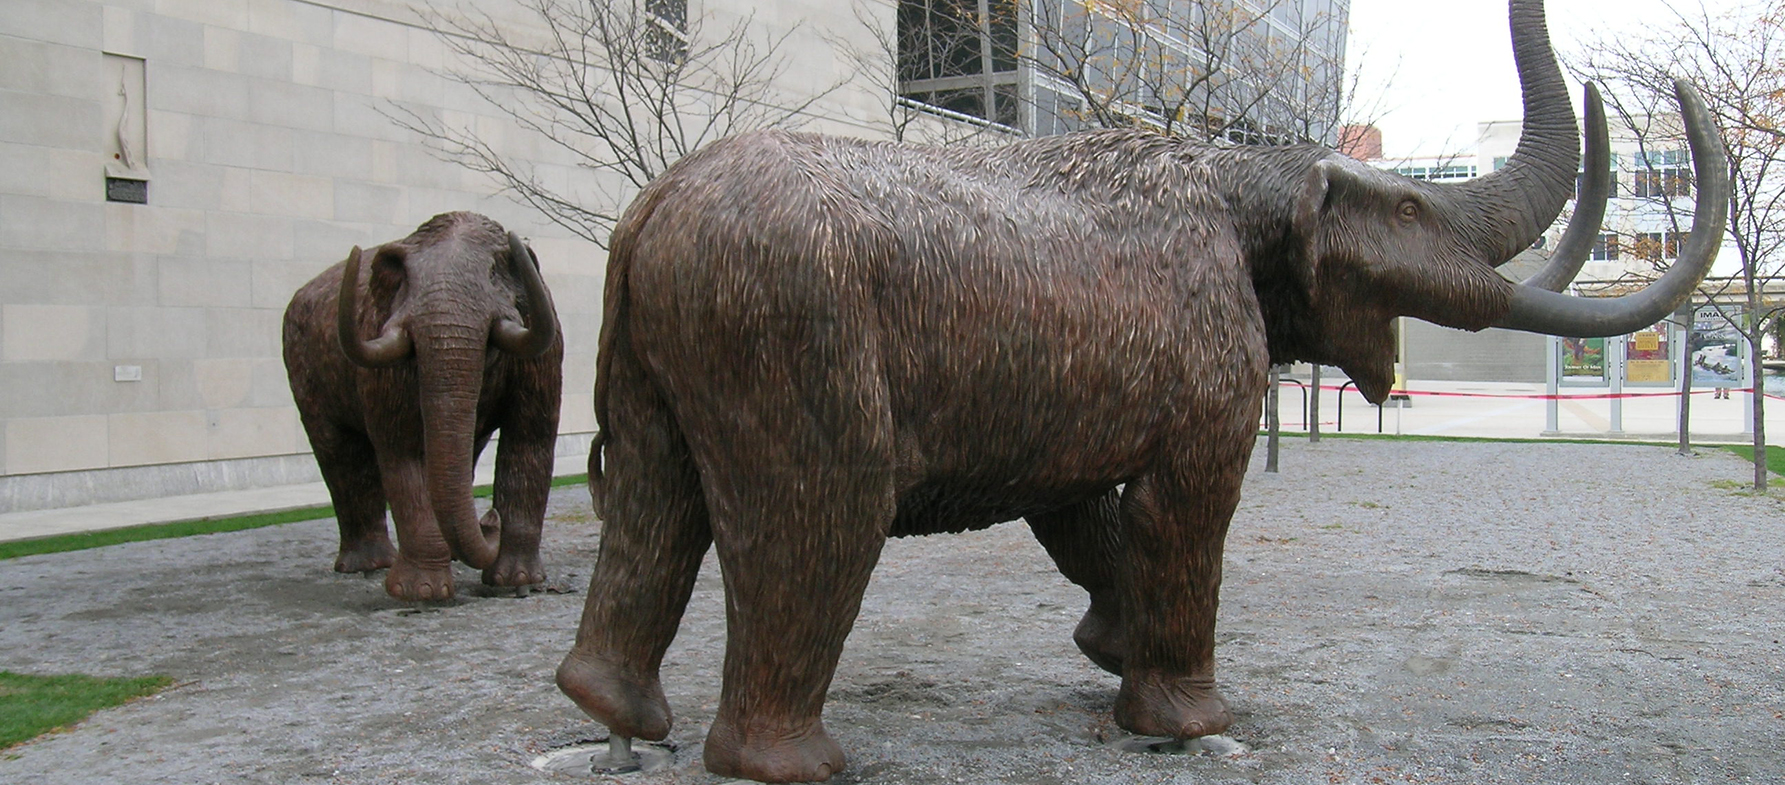 We were commissioned to sculpt, mold, and cast in bronze three life-size fleshed out Mastodon specimens for the Indiana State Museum and Purdue University